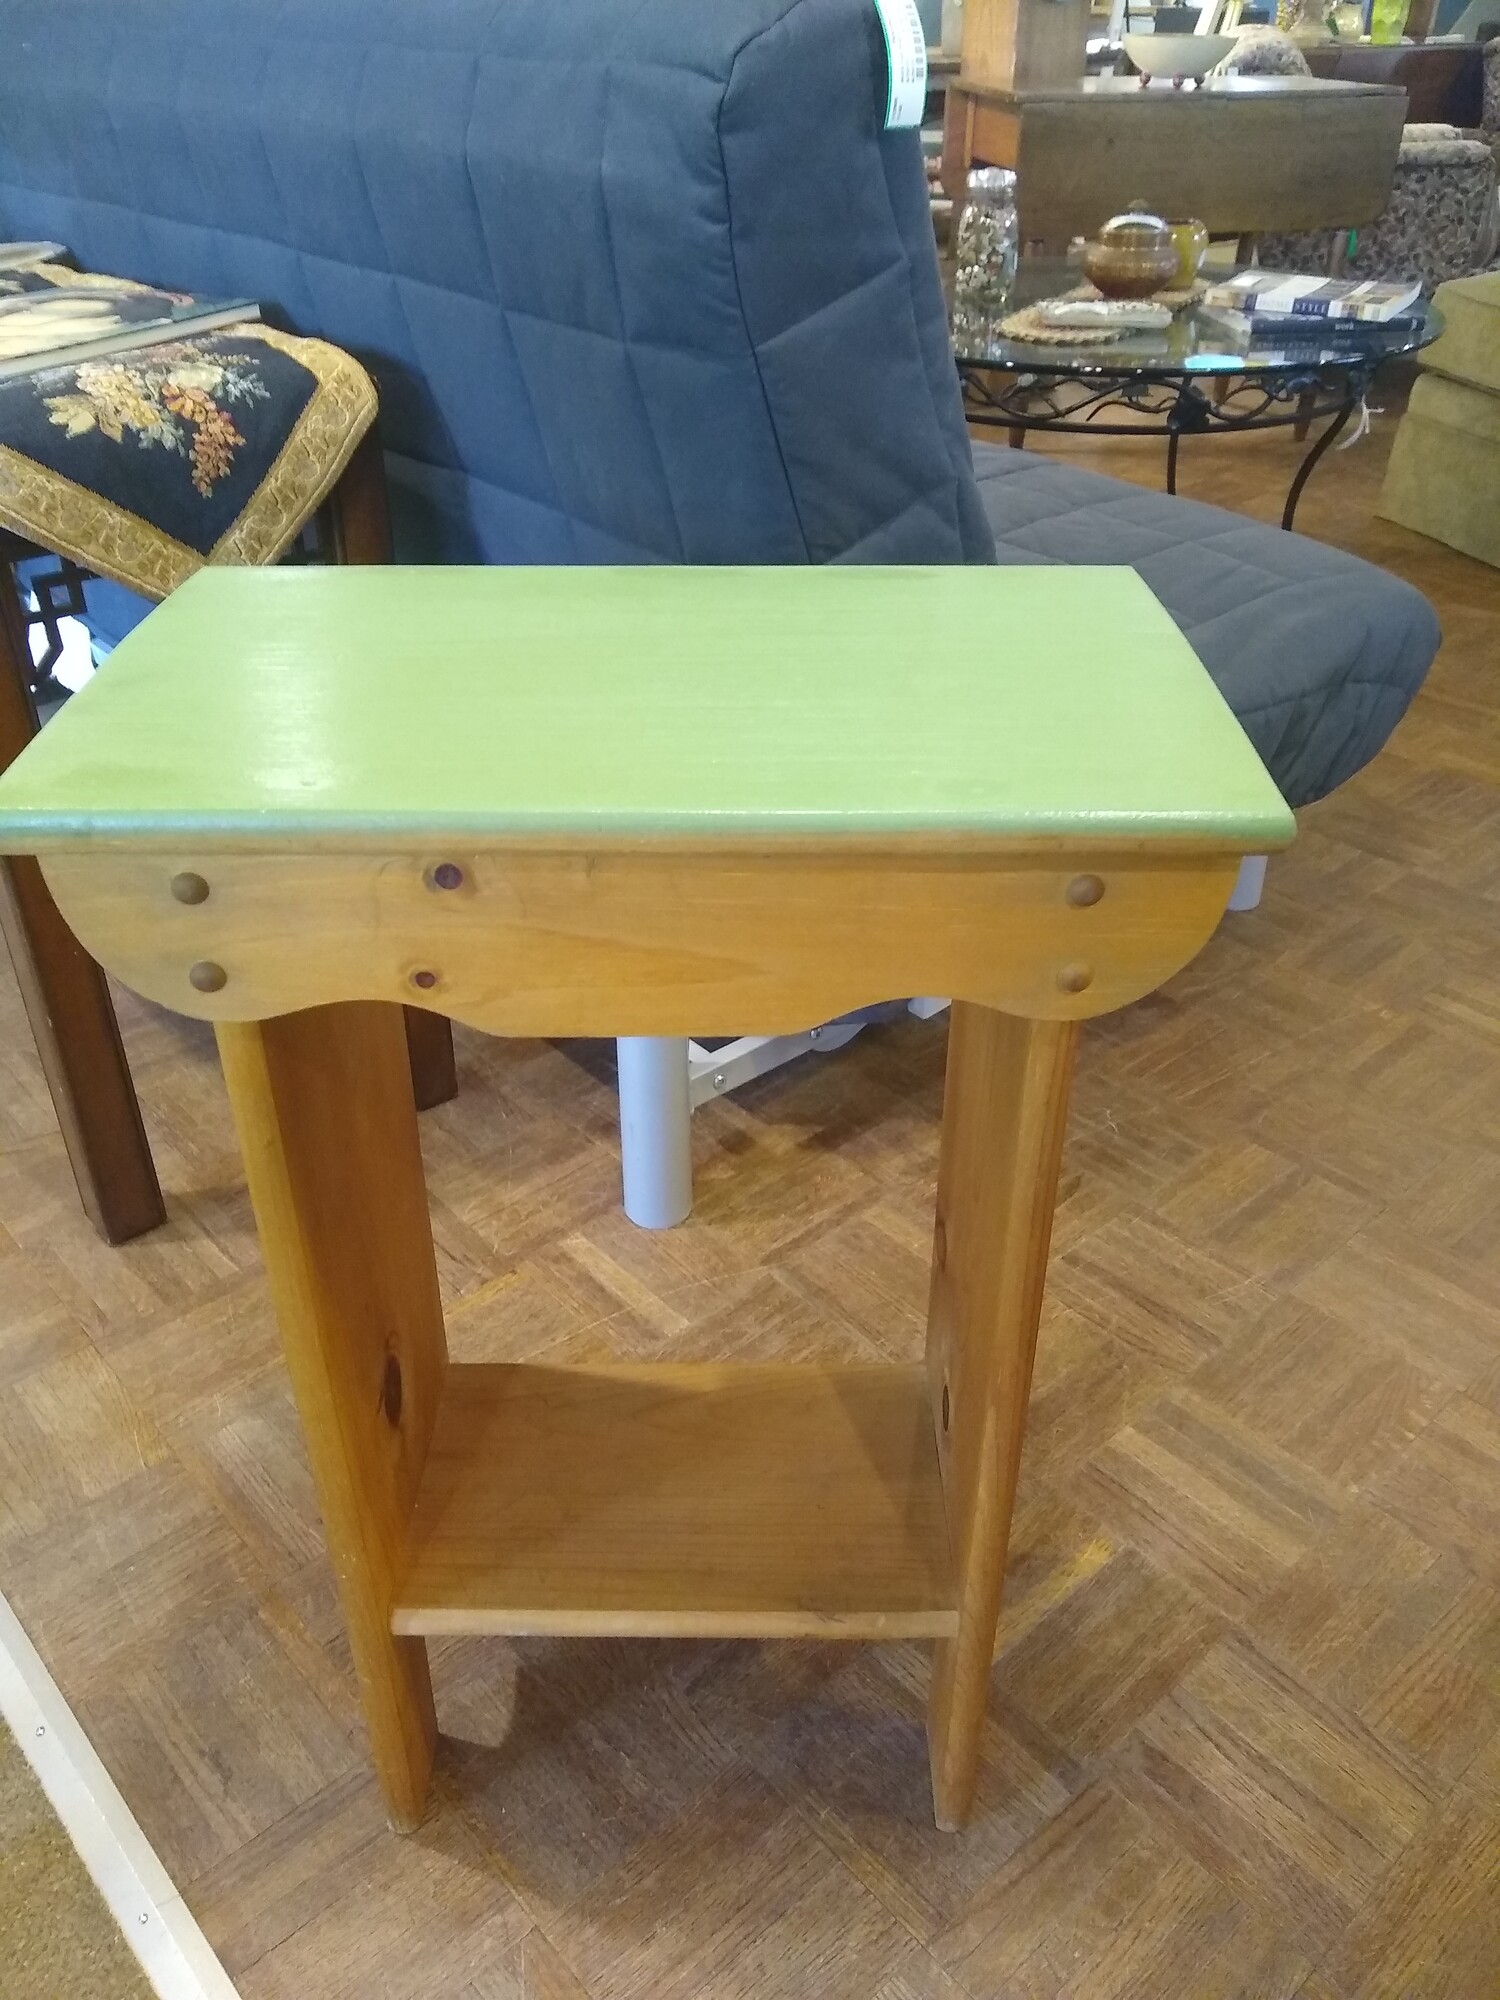 NE Pine SideTable W/Shelf

New England made pine side table with lower shelf.  Top is painted green.

Size: 18 in wide X 11 in deep X 27 in high